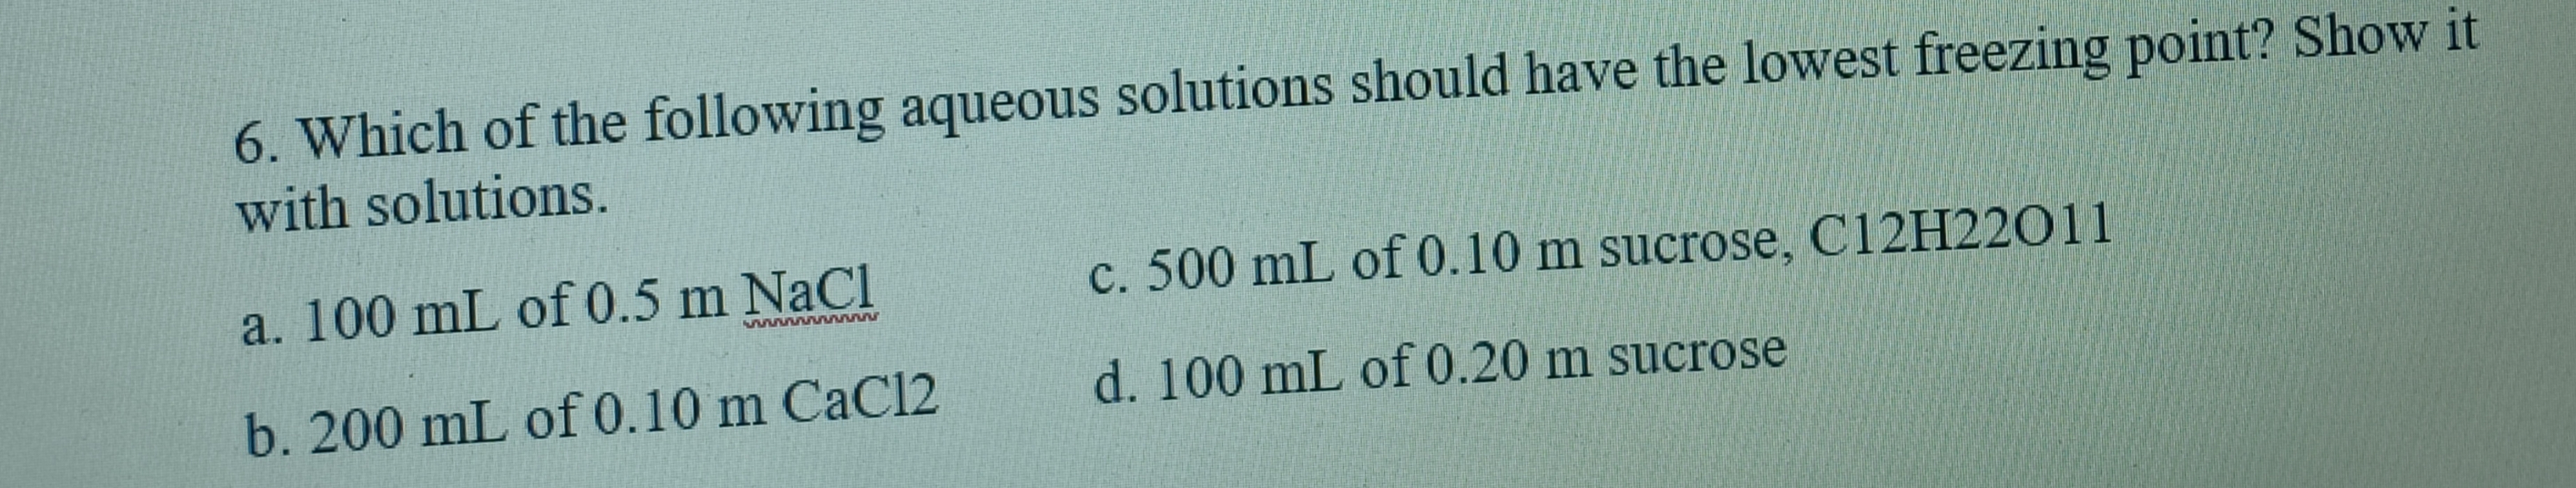 6. Which of the following aqueous solutions should have the lowest freezing point? Show it
with solutions.
a. 100 mL of 0.5 m NaCl
c. 500 mL of 0.10 m sucrose, C12H22011
w w ww
b. 200 mL of 0.10 m CaCl2
d. 100 mL of 0.20 m sucrose
